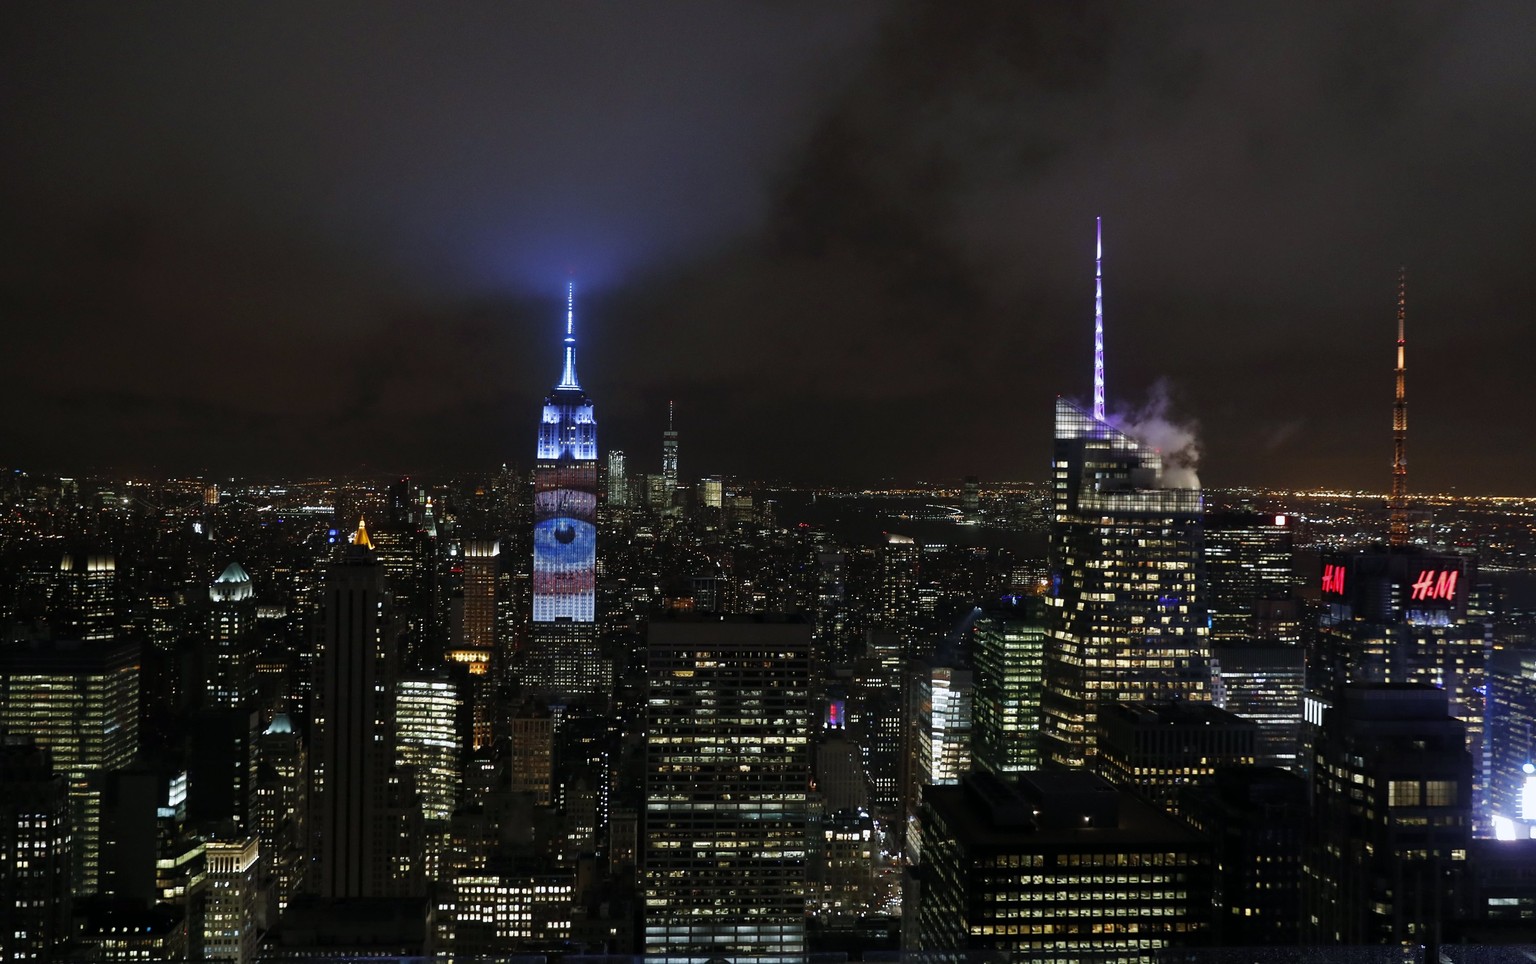 epa05916221 An artist&#039;s rendering of a Harper&#039;s Bazaar magazine cover is projected onto the Empire State Building&#039;s north facade to celebrate the 150th anniversary of Harper&#039;s Baza ...